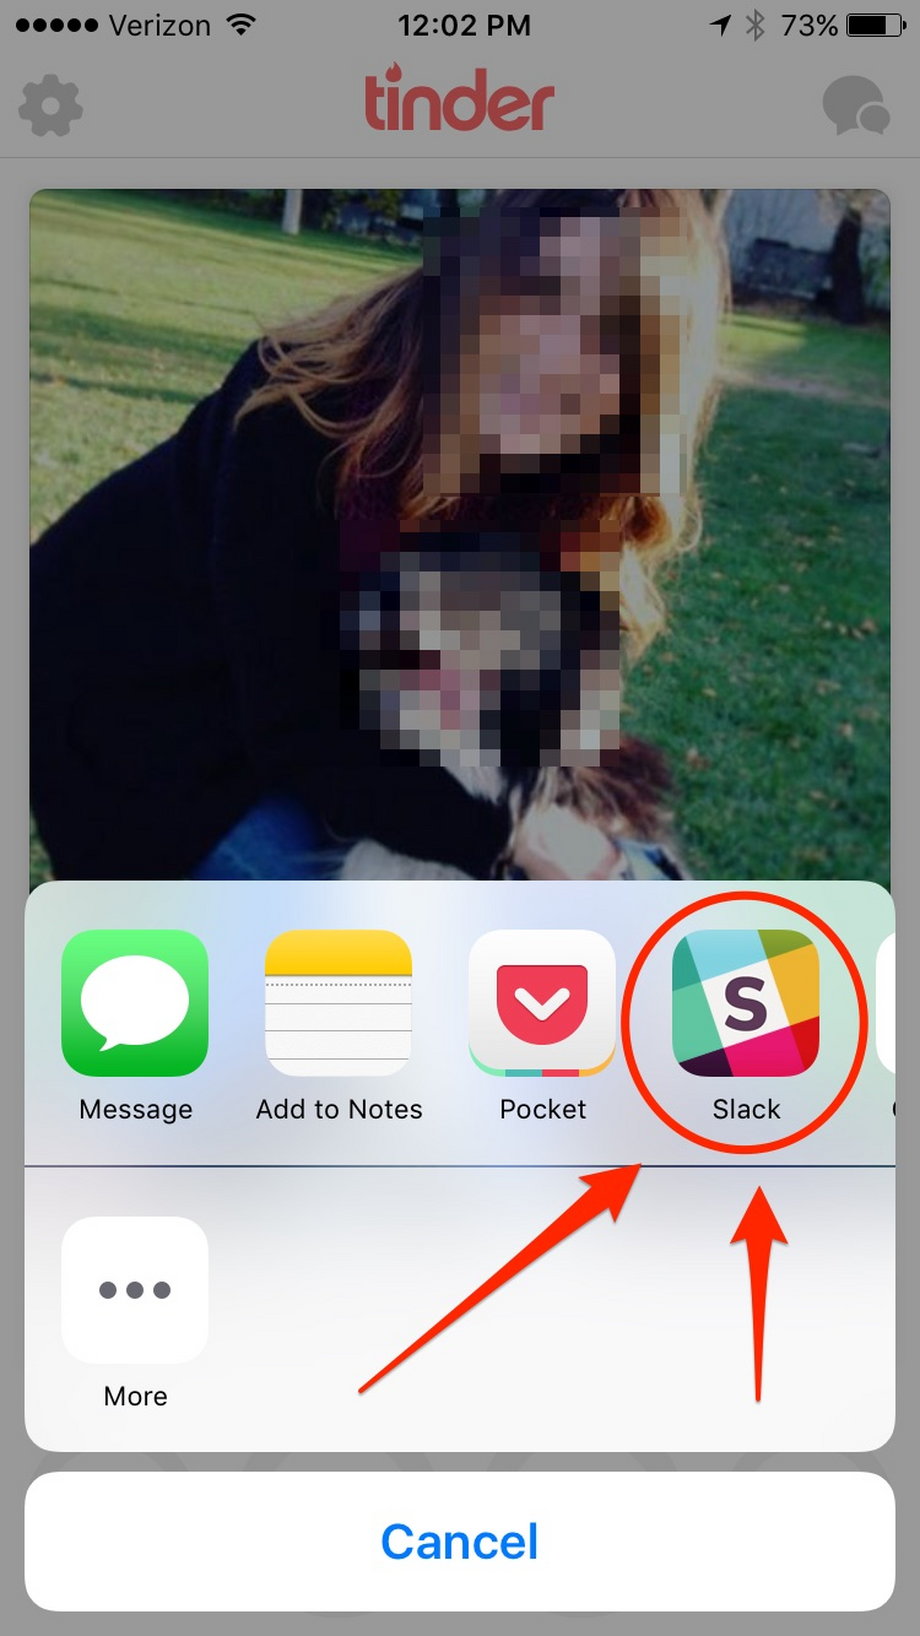 When you click it, you see a list of apps you can share to, including Slack. You can also share through text message.